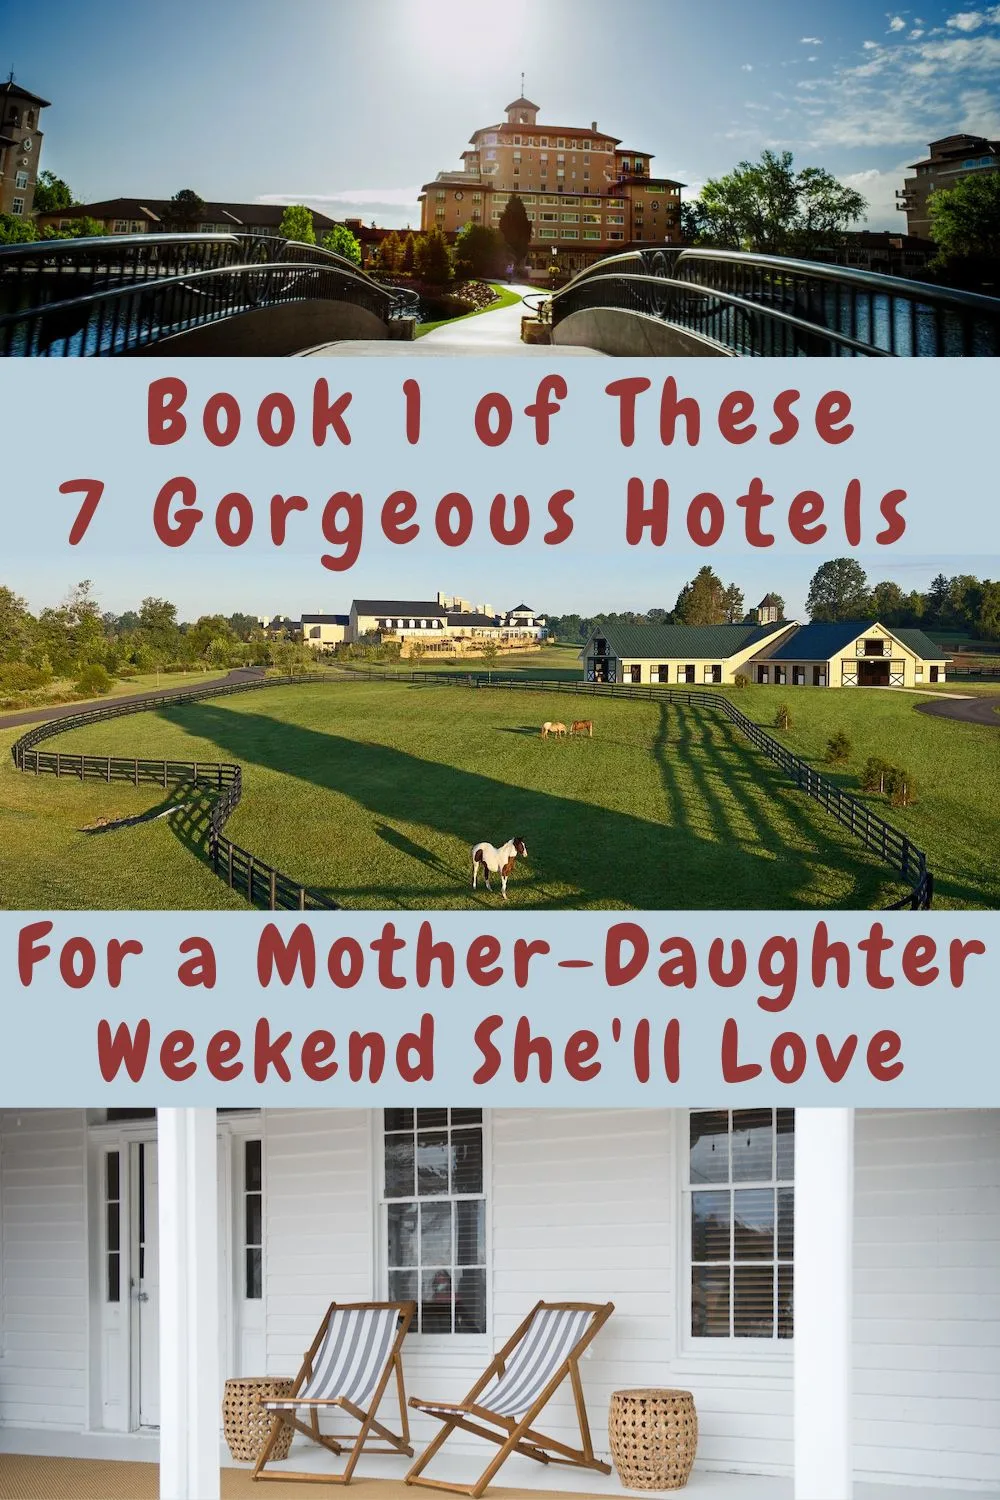 need a present mom will love? book one of these 7 gorgeous hotels for an unforgettable mother-daughter weekend getaway.  